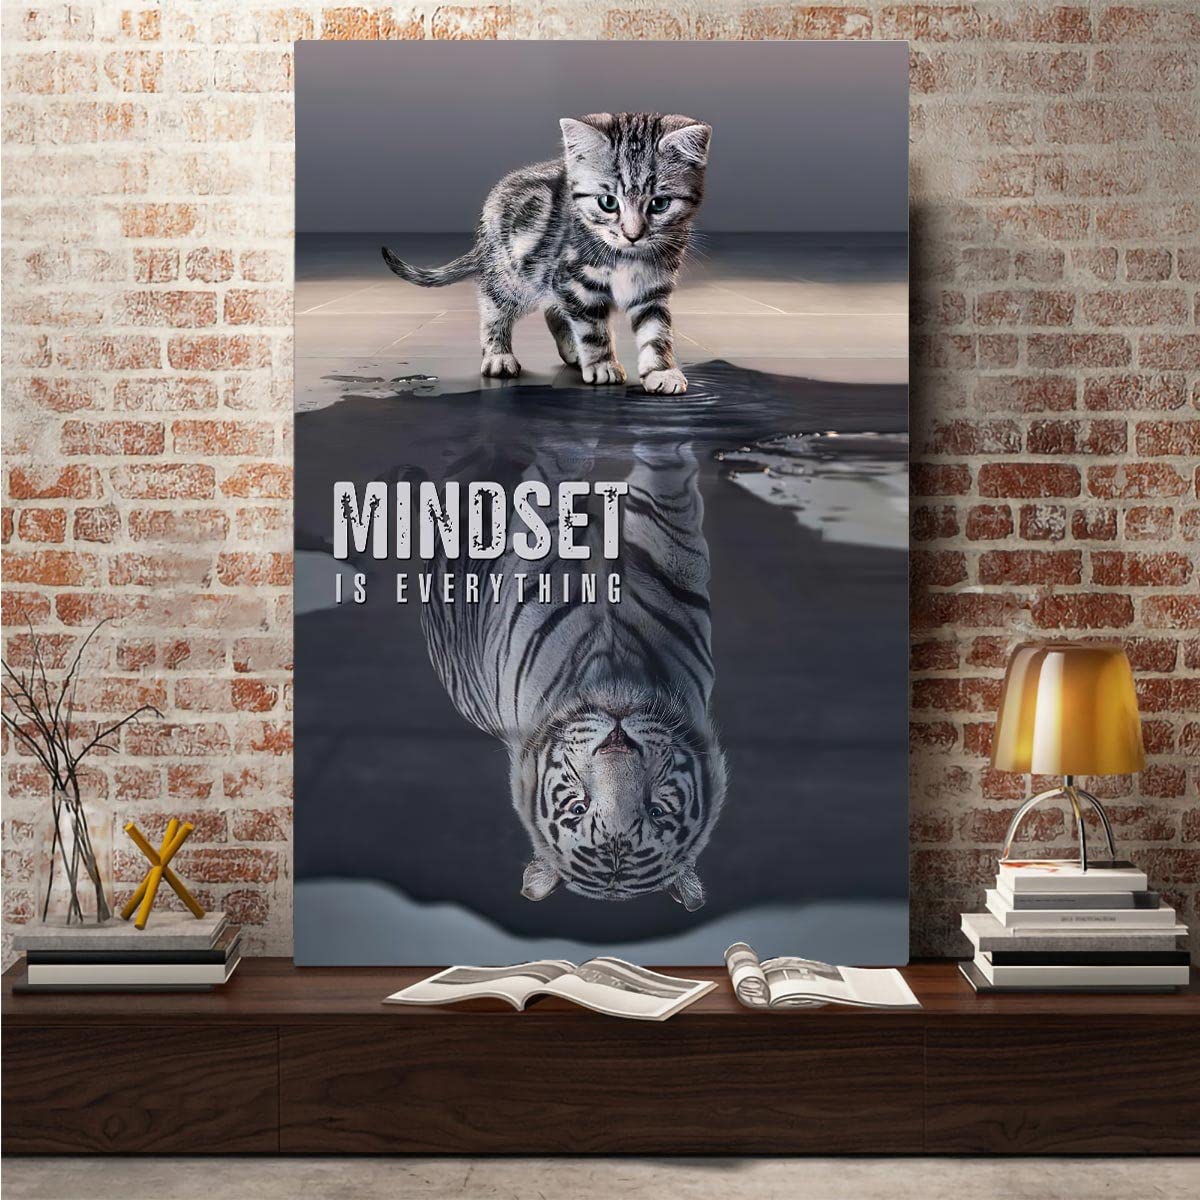 Inspirational Quotes Poster,Mindset Is Everything,Motivational Canvas Wall Art For Living Room Decor Aesthetic Vintage Posters & Prints Canvas Paintings Wall Art Over Bed Wall Unframed 12x18 inches